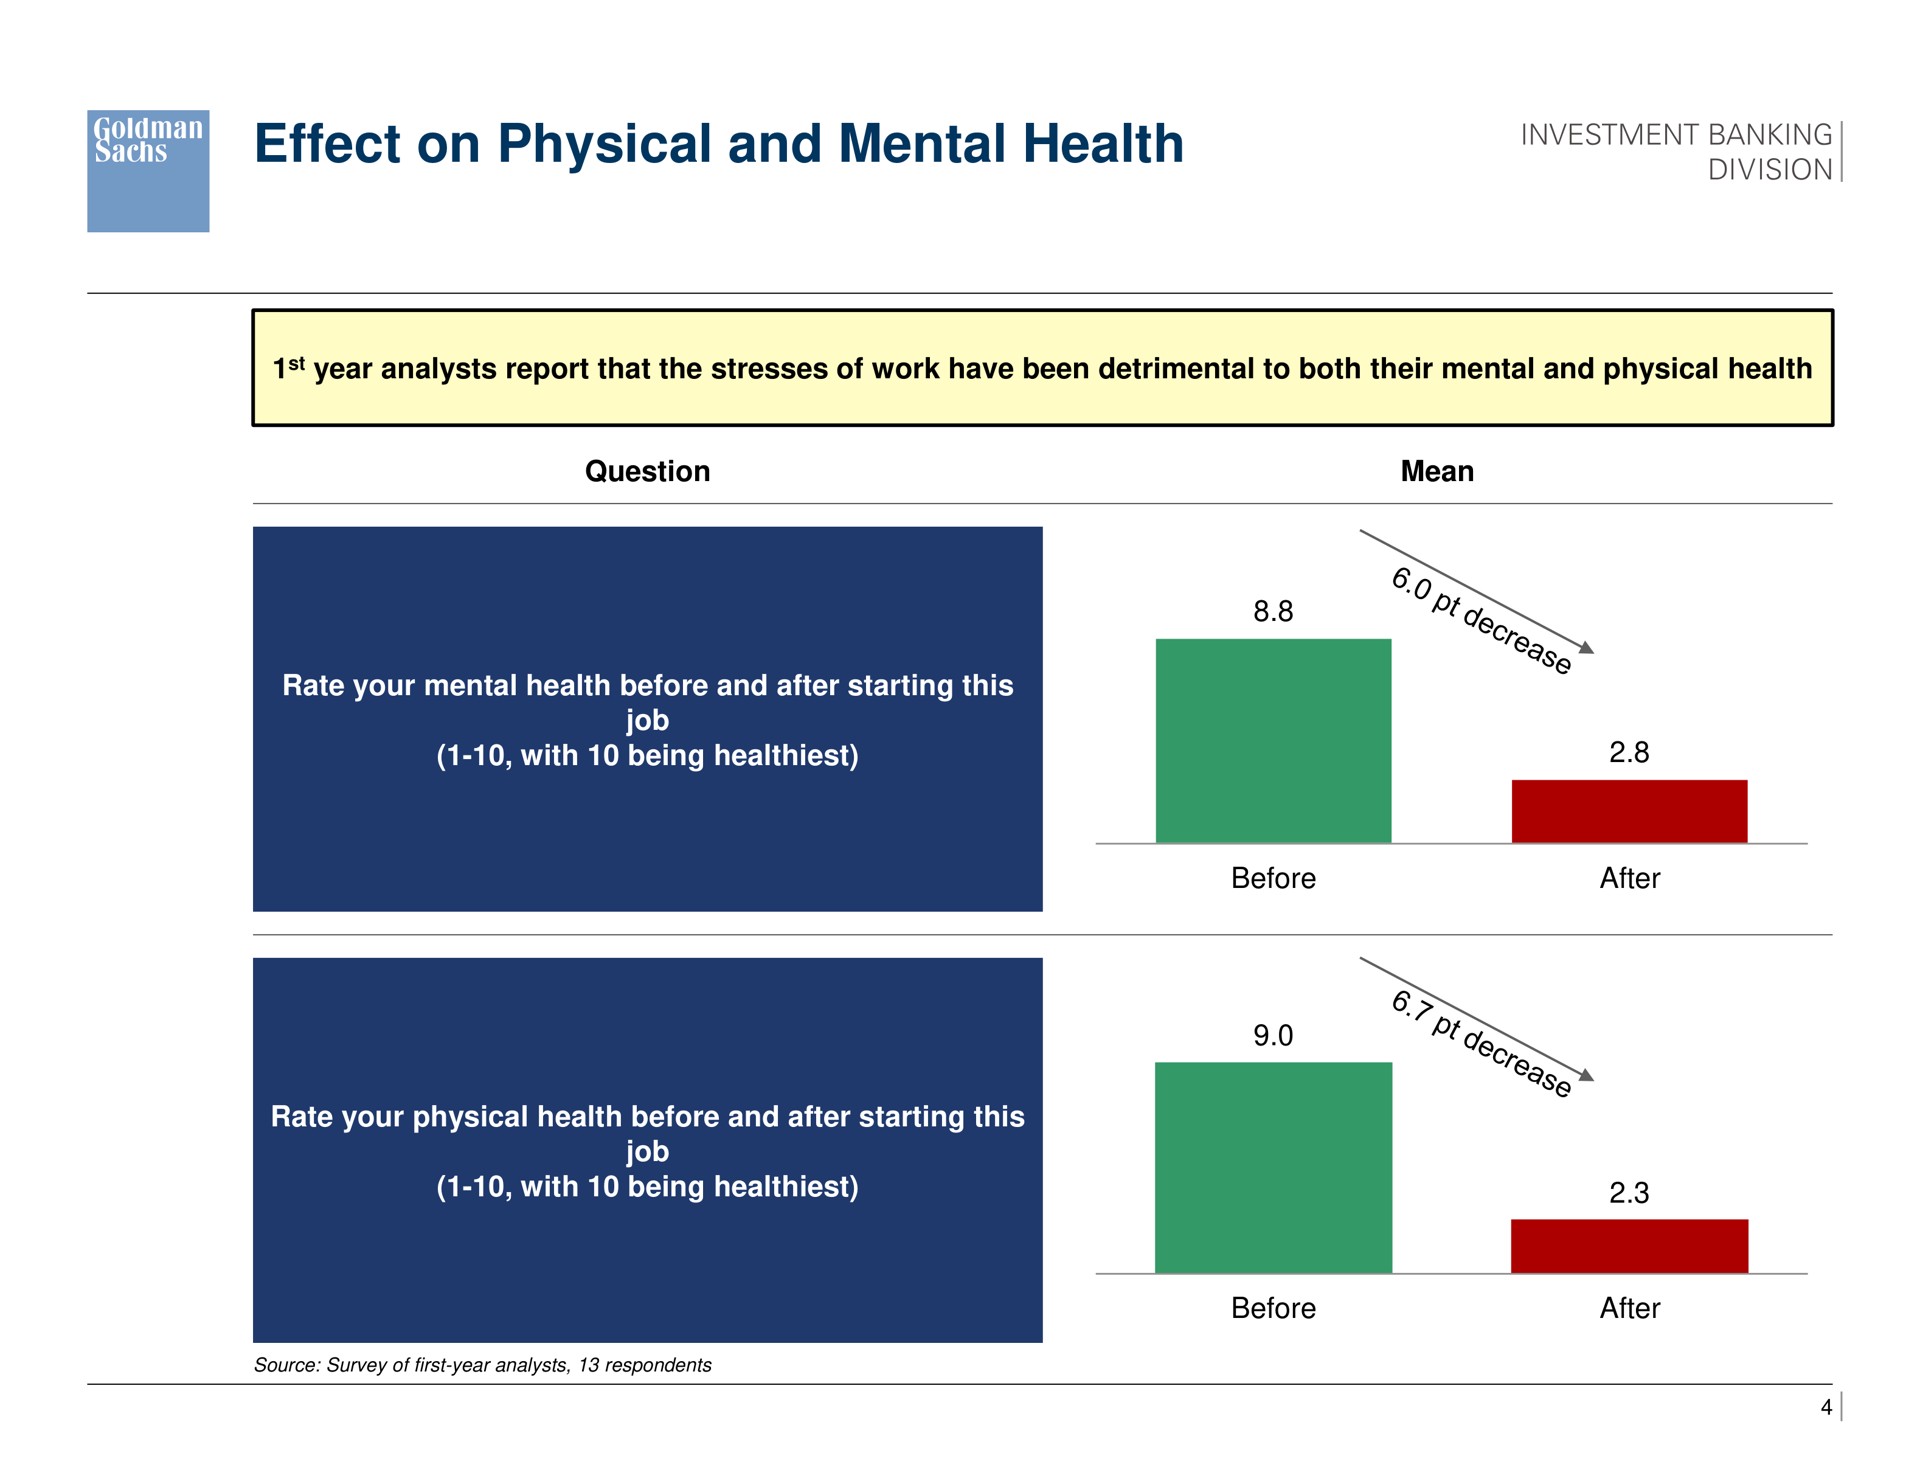 effect on physical and mental health suite | Goldman Sachs